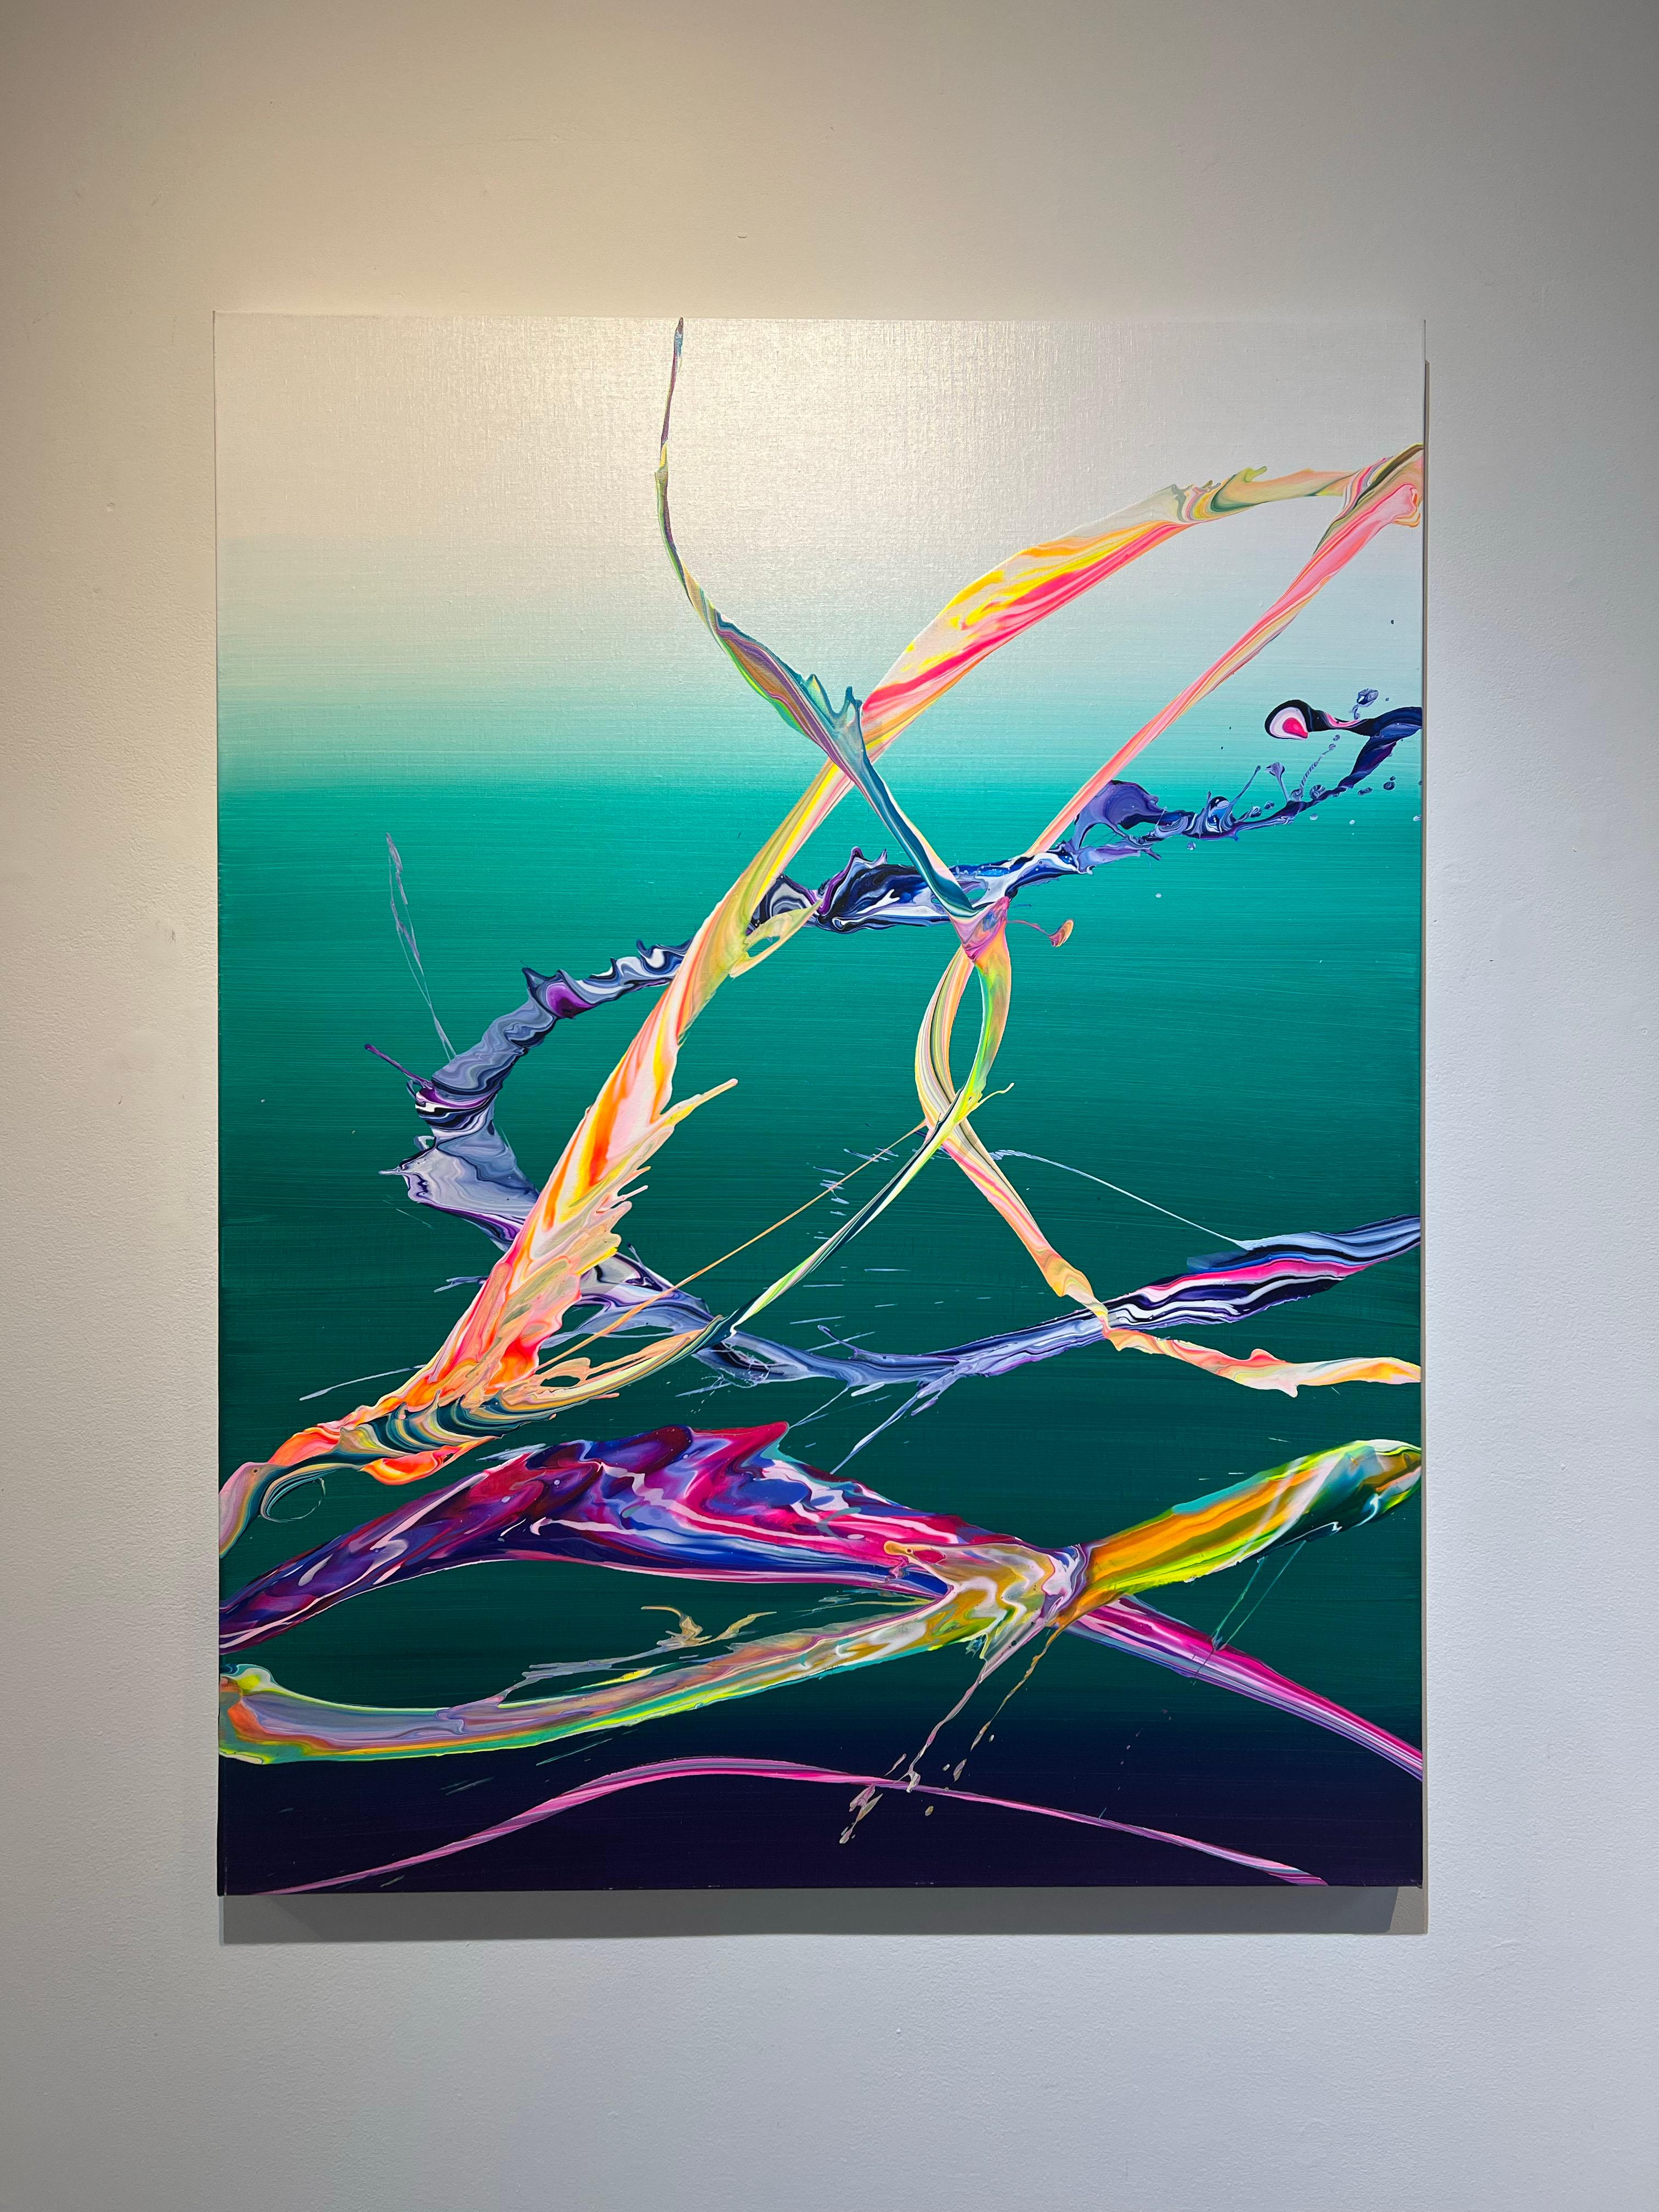 AV 762 - A Liquid Abstraction in Vivid Colors Against a White to Teal Ombré - Painting by Alex Voinea